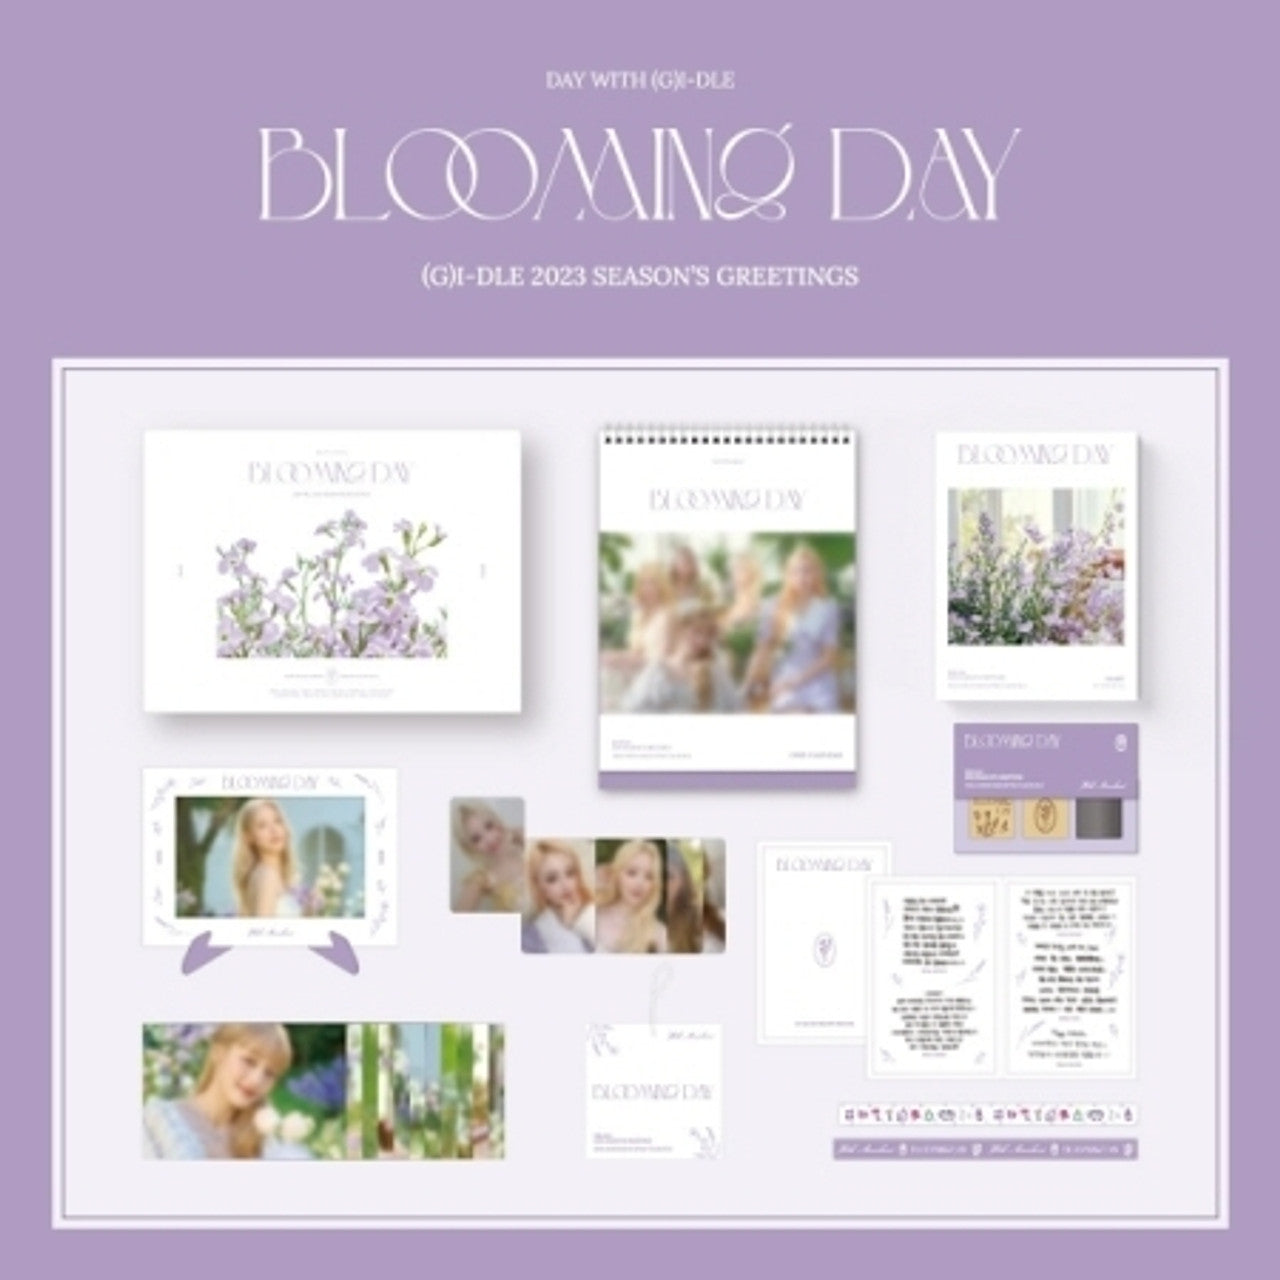 (G)i-Dle Blooming Day 2023 Seasons Greetings - Zhivago Gifts